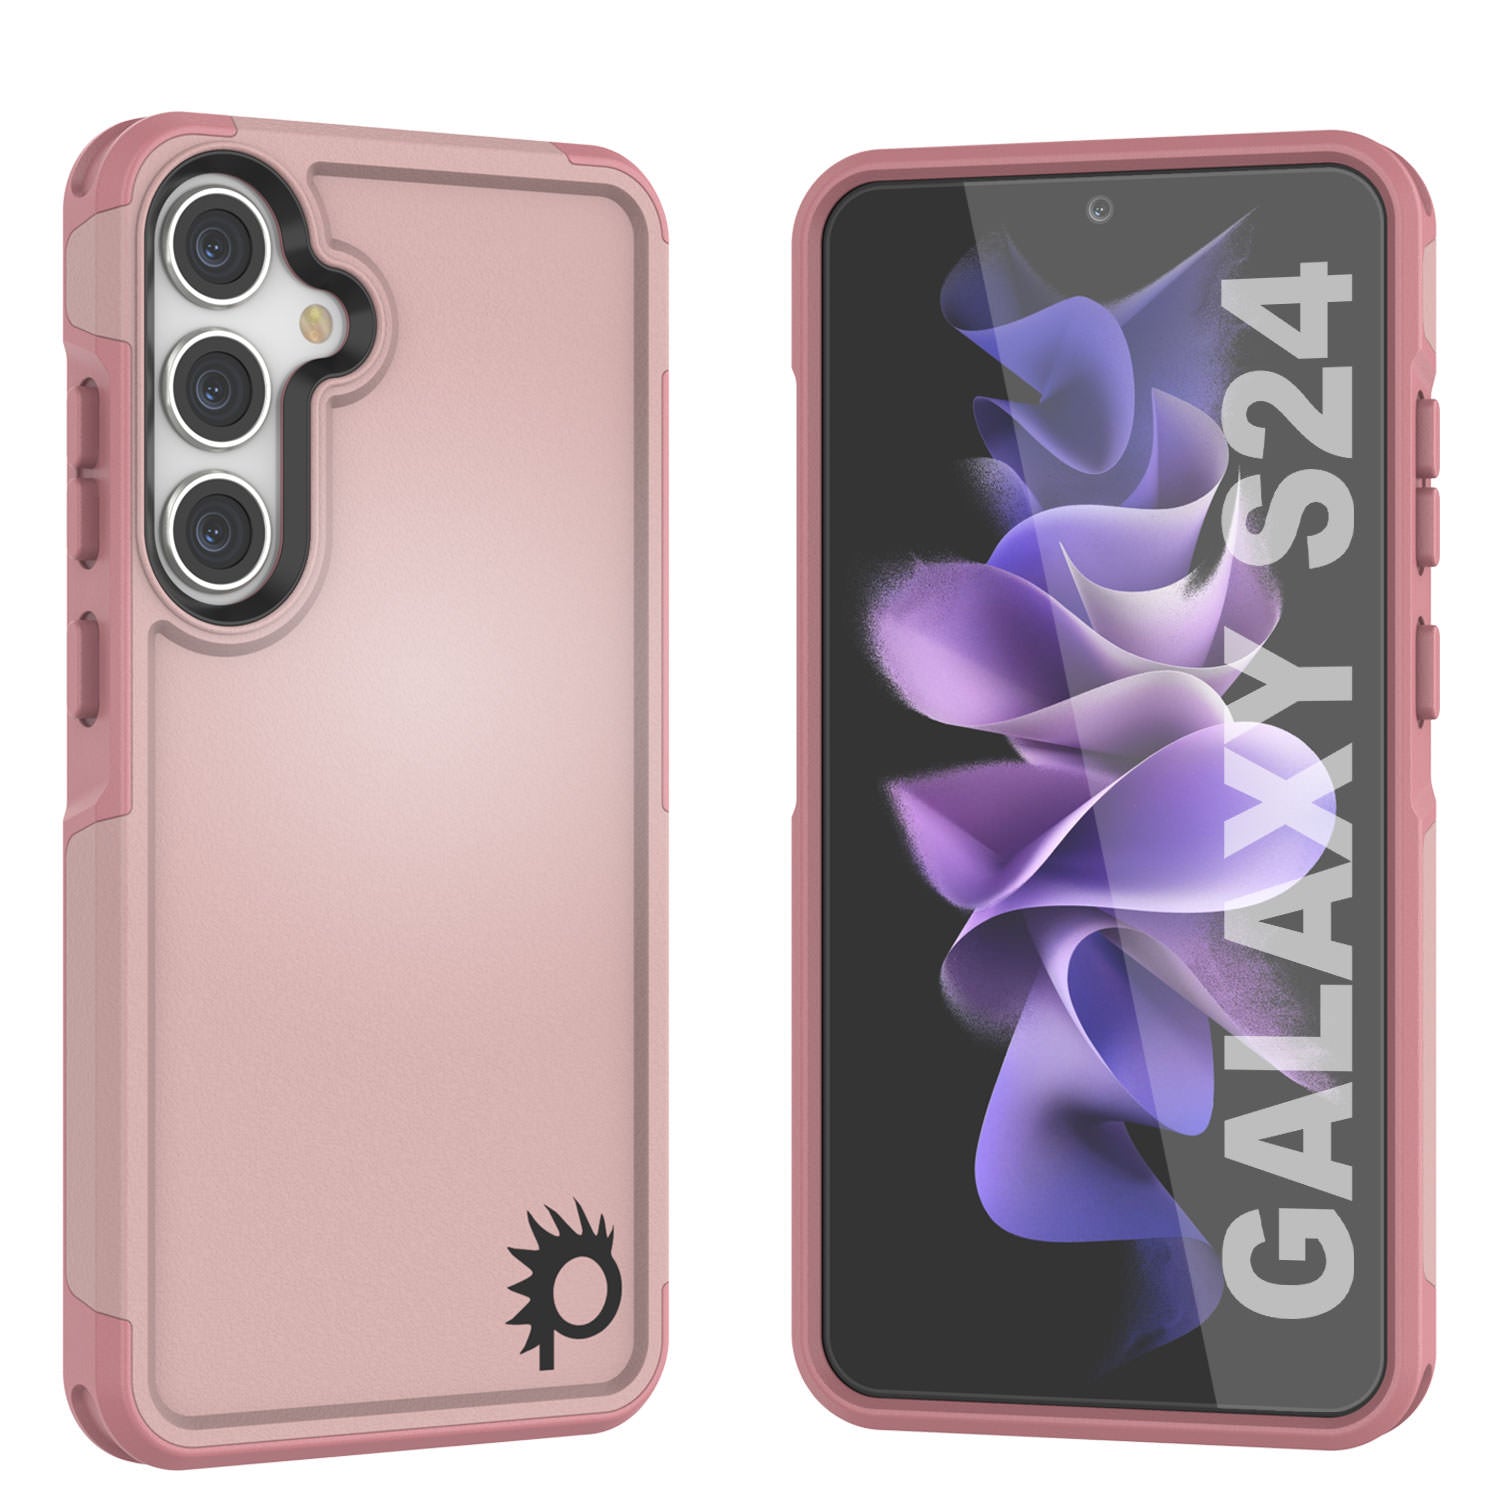 PunkCase Galaxy S24 Case, [Spartan 2.0 Series] Clear Rugged Heavy Duty Cover [Pink]